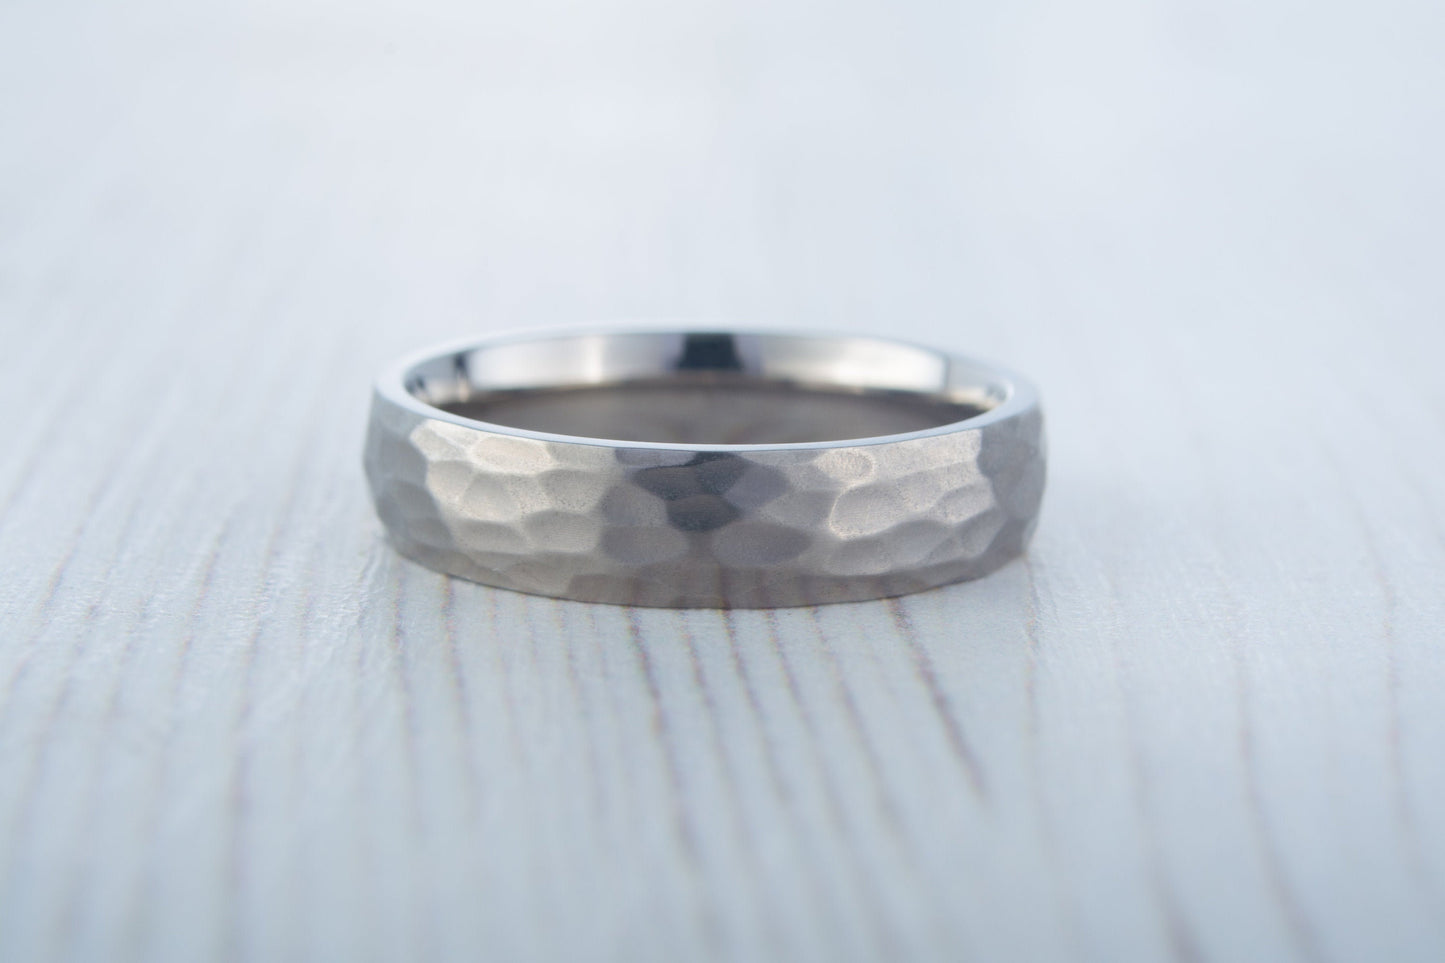 5mm Hammered finish Titanium Wedding ring band for men and women